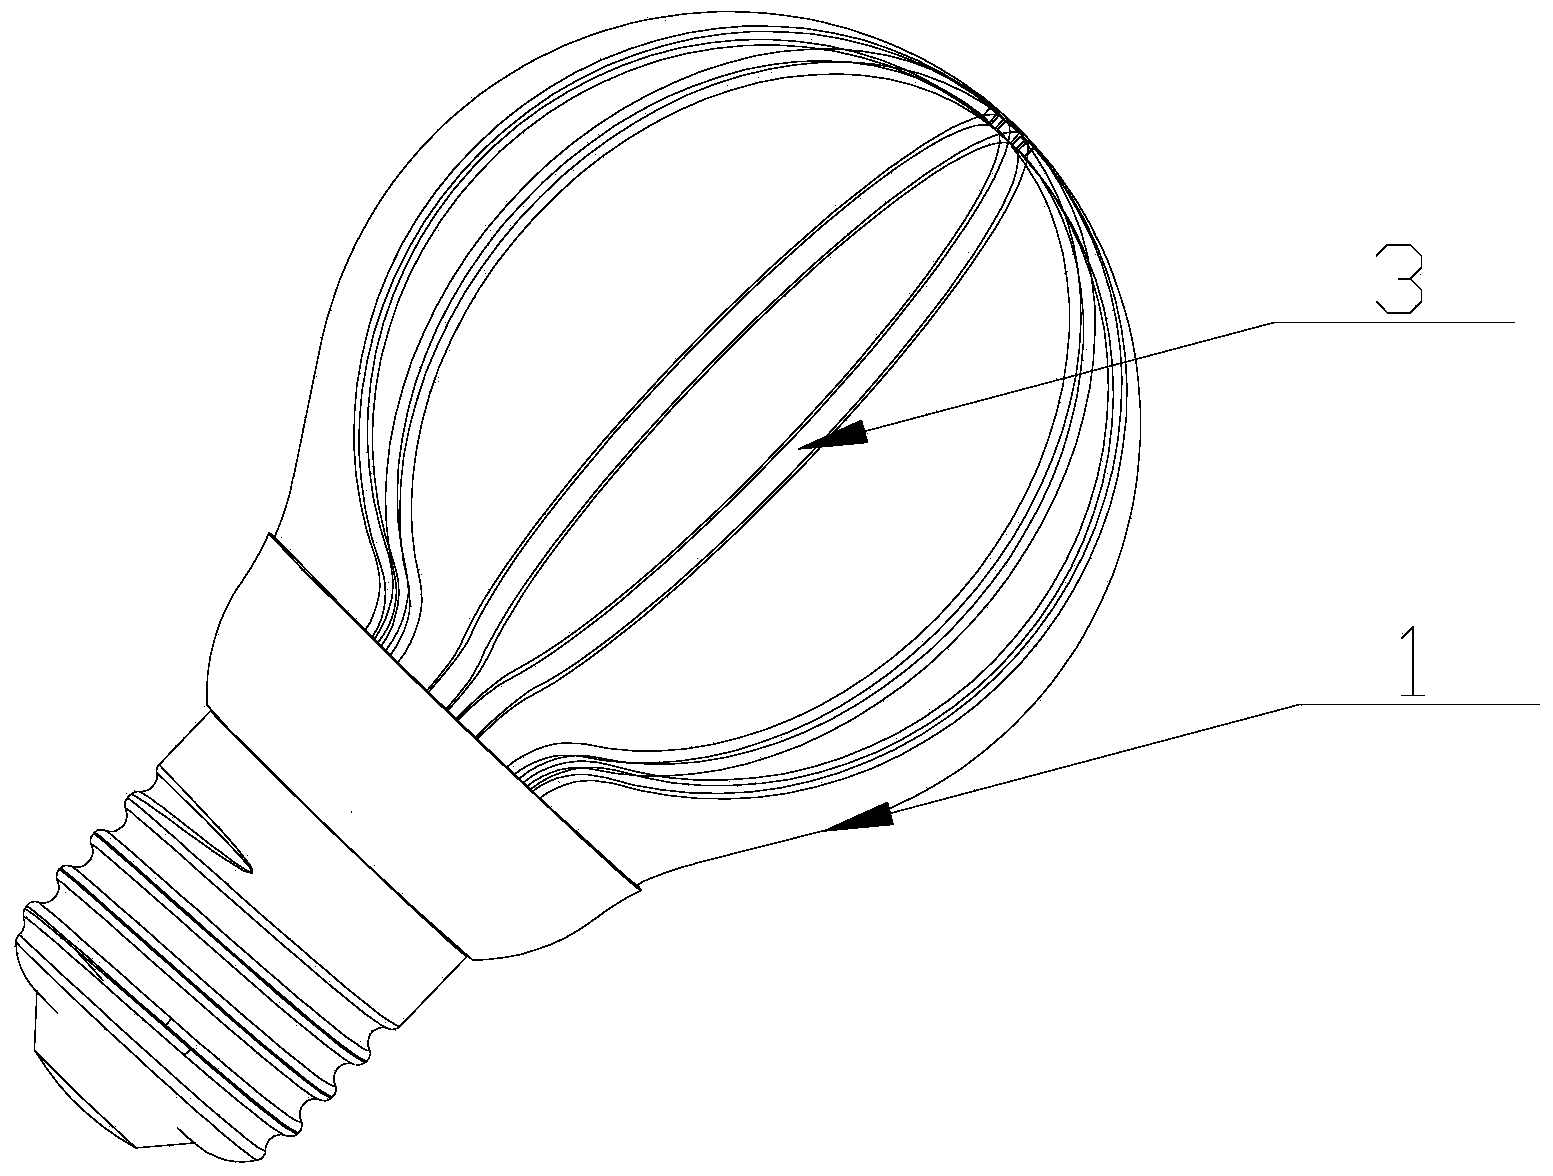 LED lamp with specifically-arranged light-emitting chips